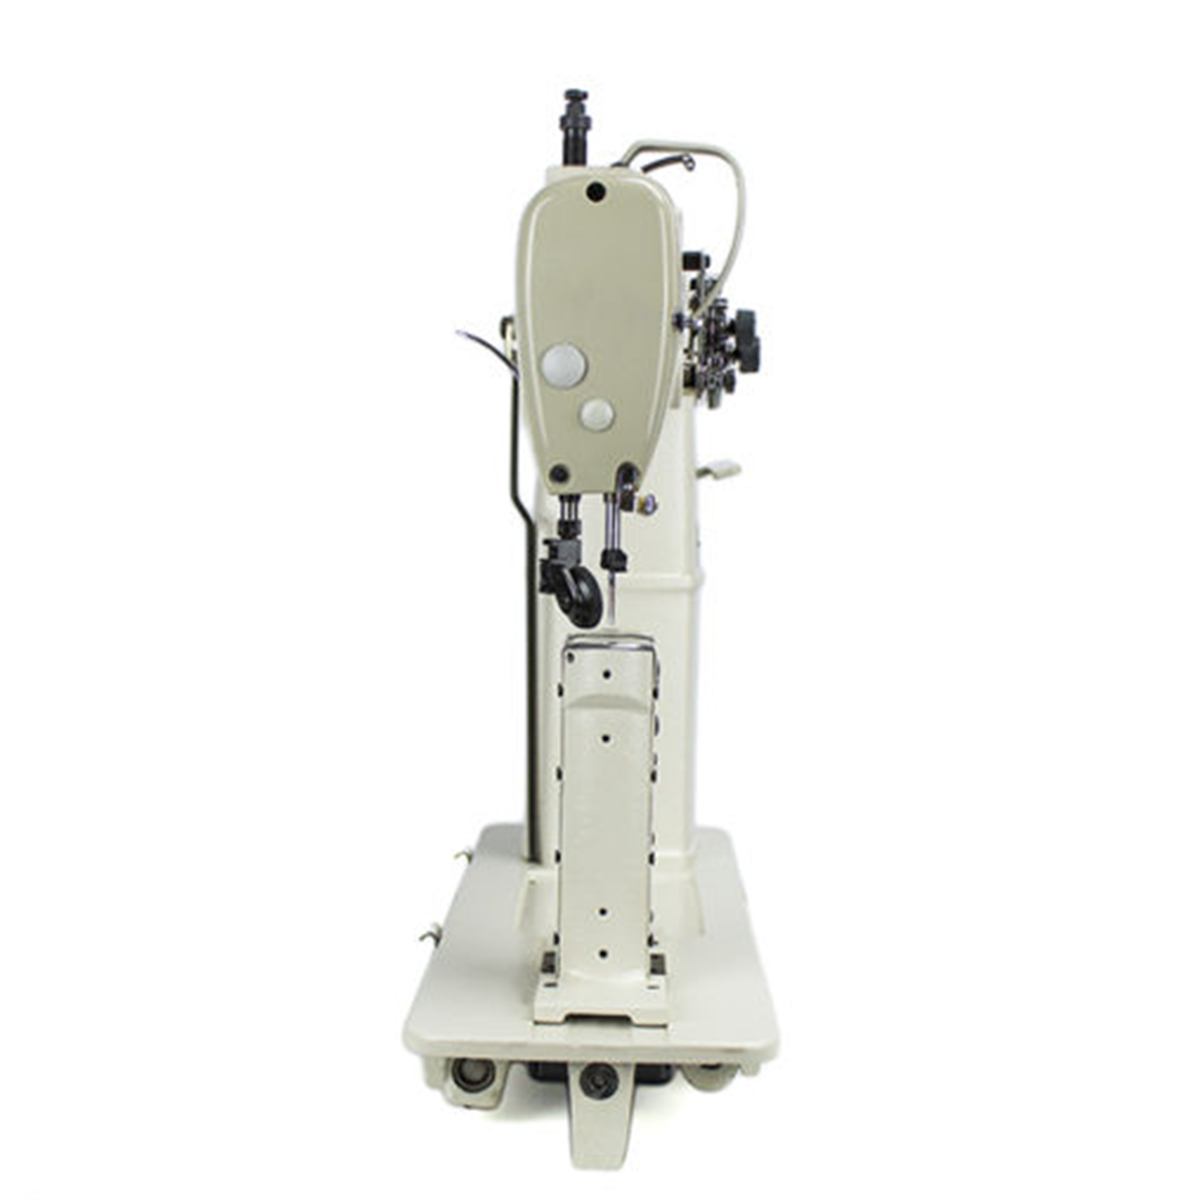 SPEEDWAY SW-820 Double Needle Post-bed Lockstitch Industrial Sewing Machine with Servo Motor, Table and Stand Included